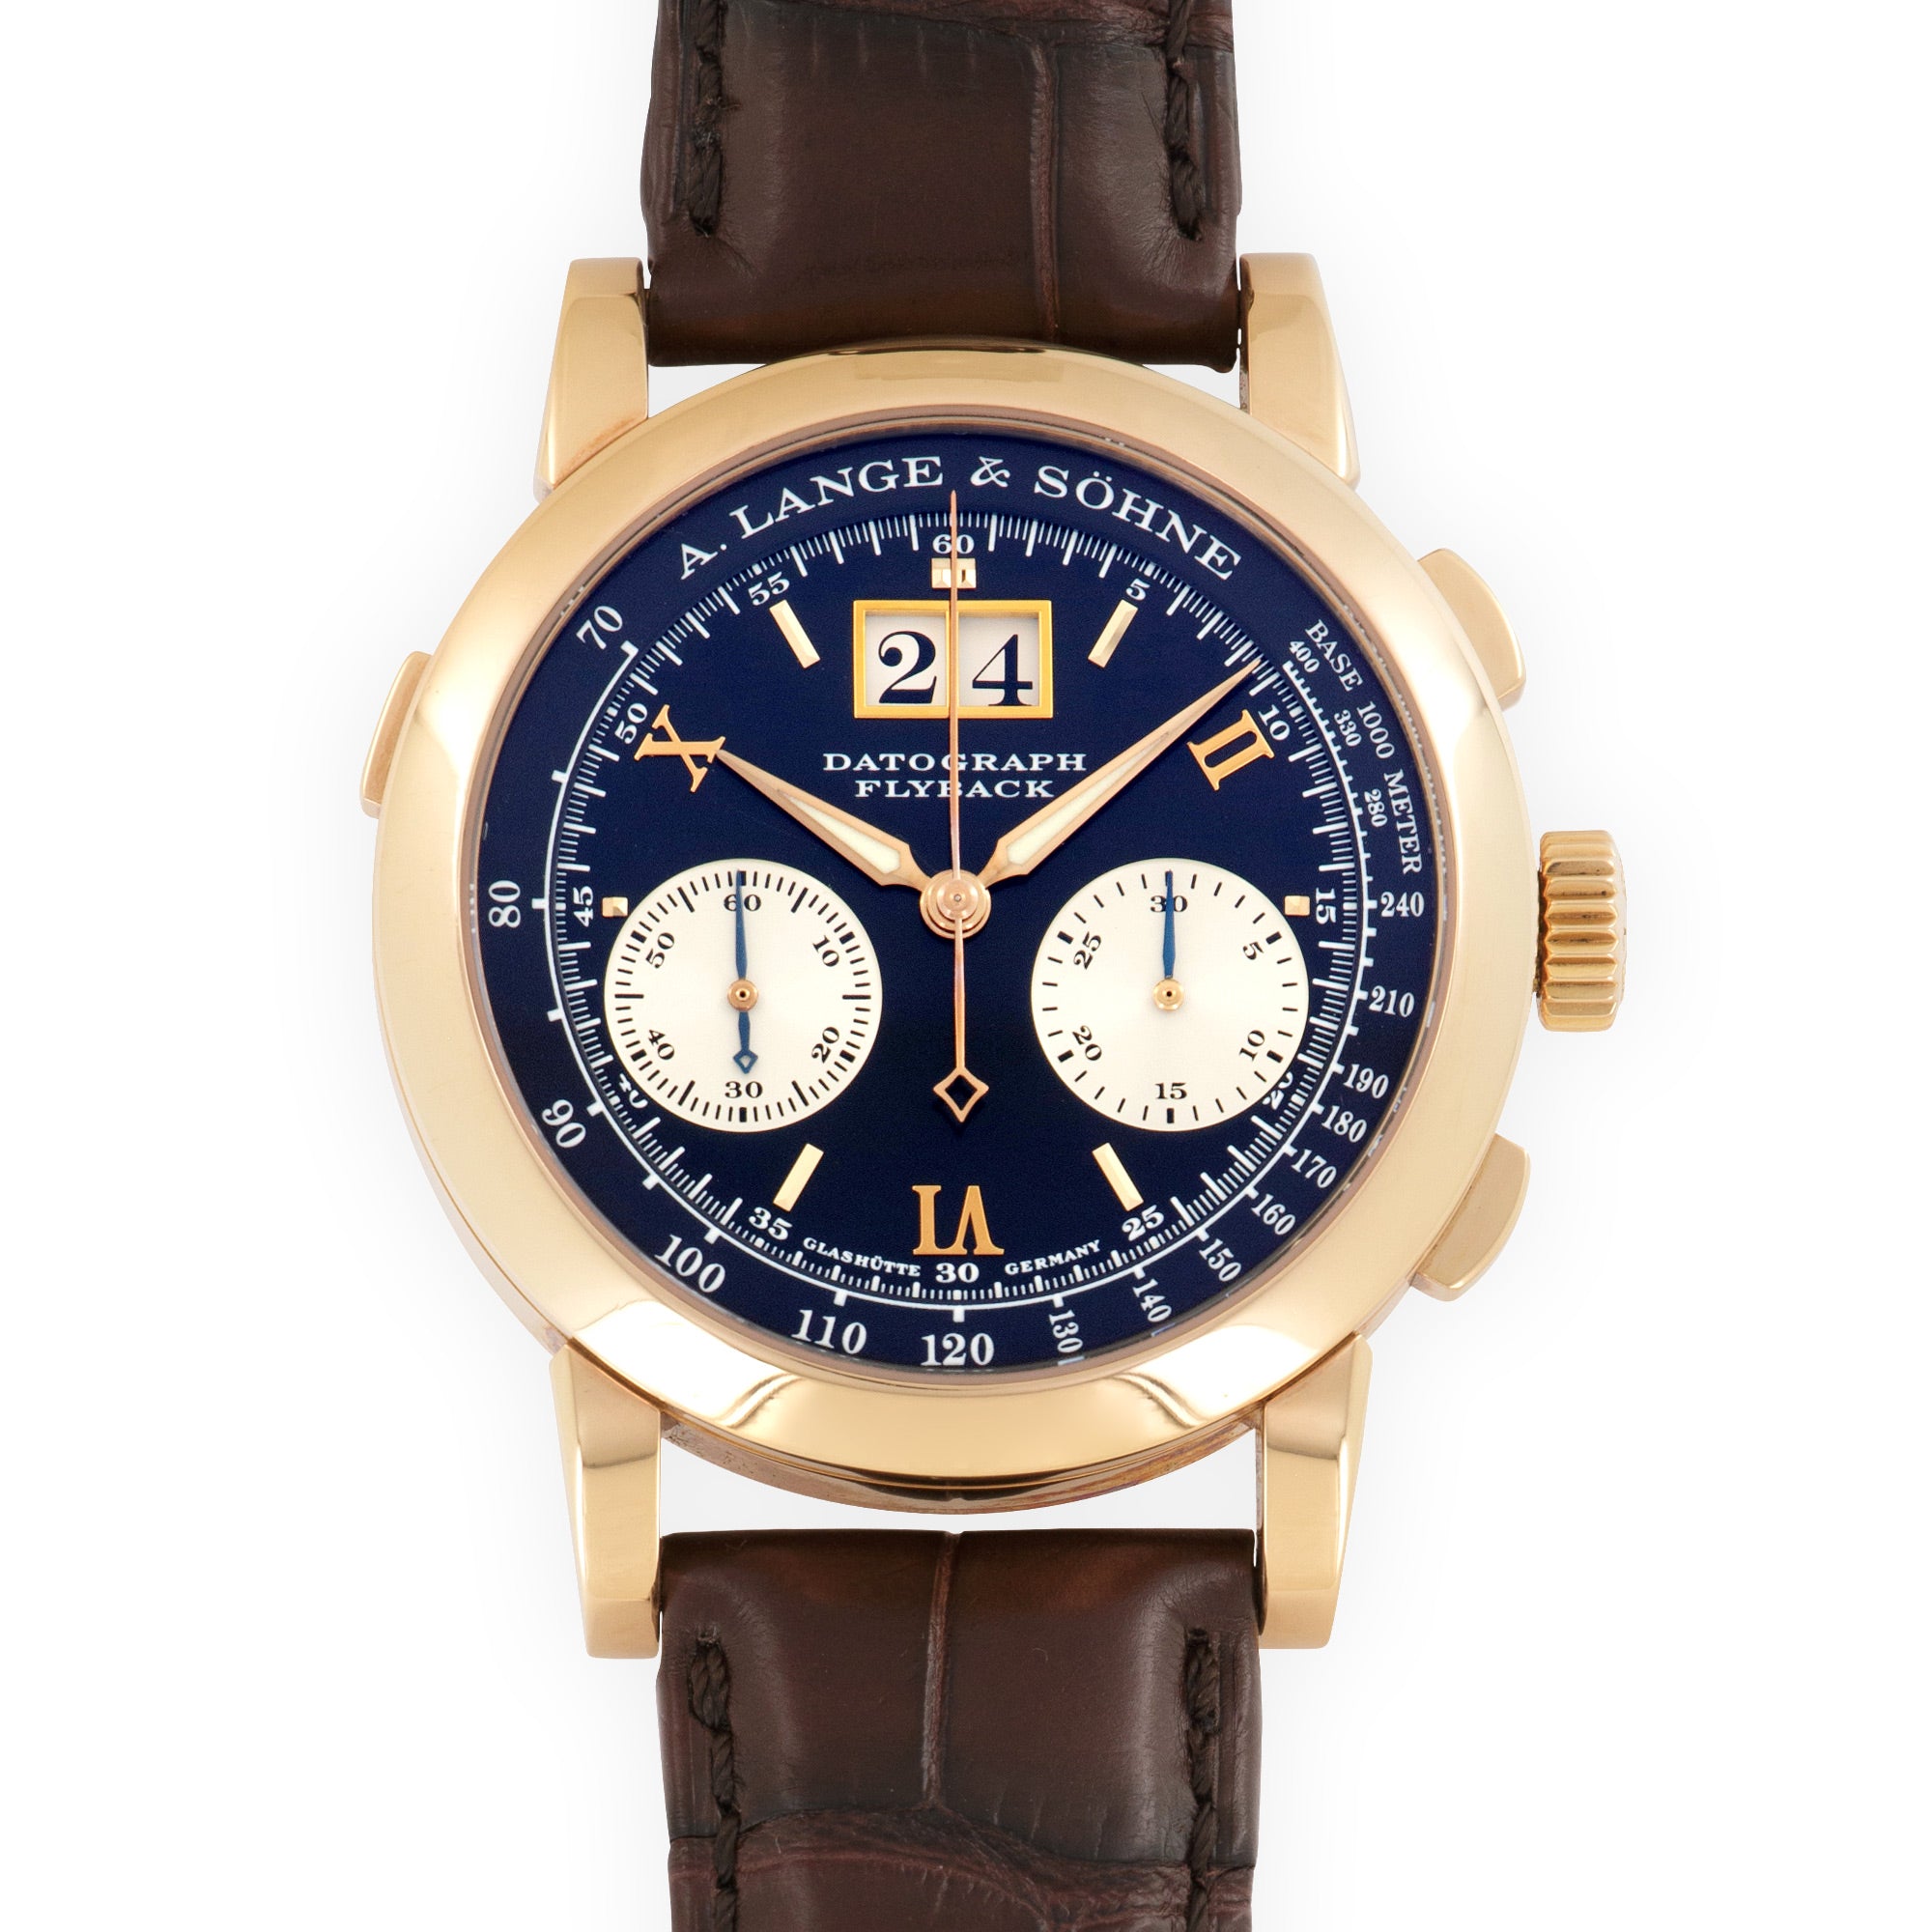 A. Lange &amp; Sohne - A. Lange &amp; Sohne Rose Gold Datograph Dufour Watch Ref. 403.031 - The Keystone Watches